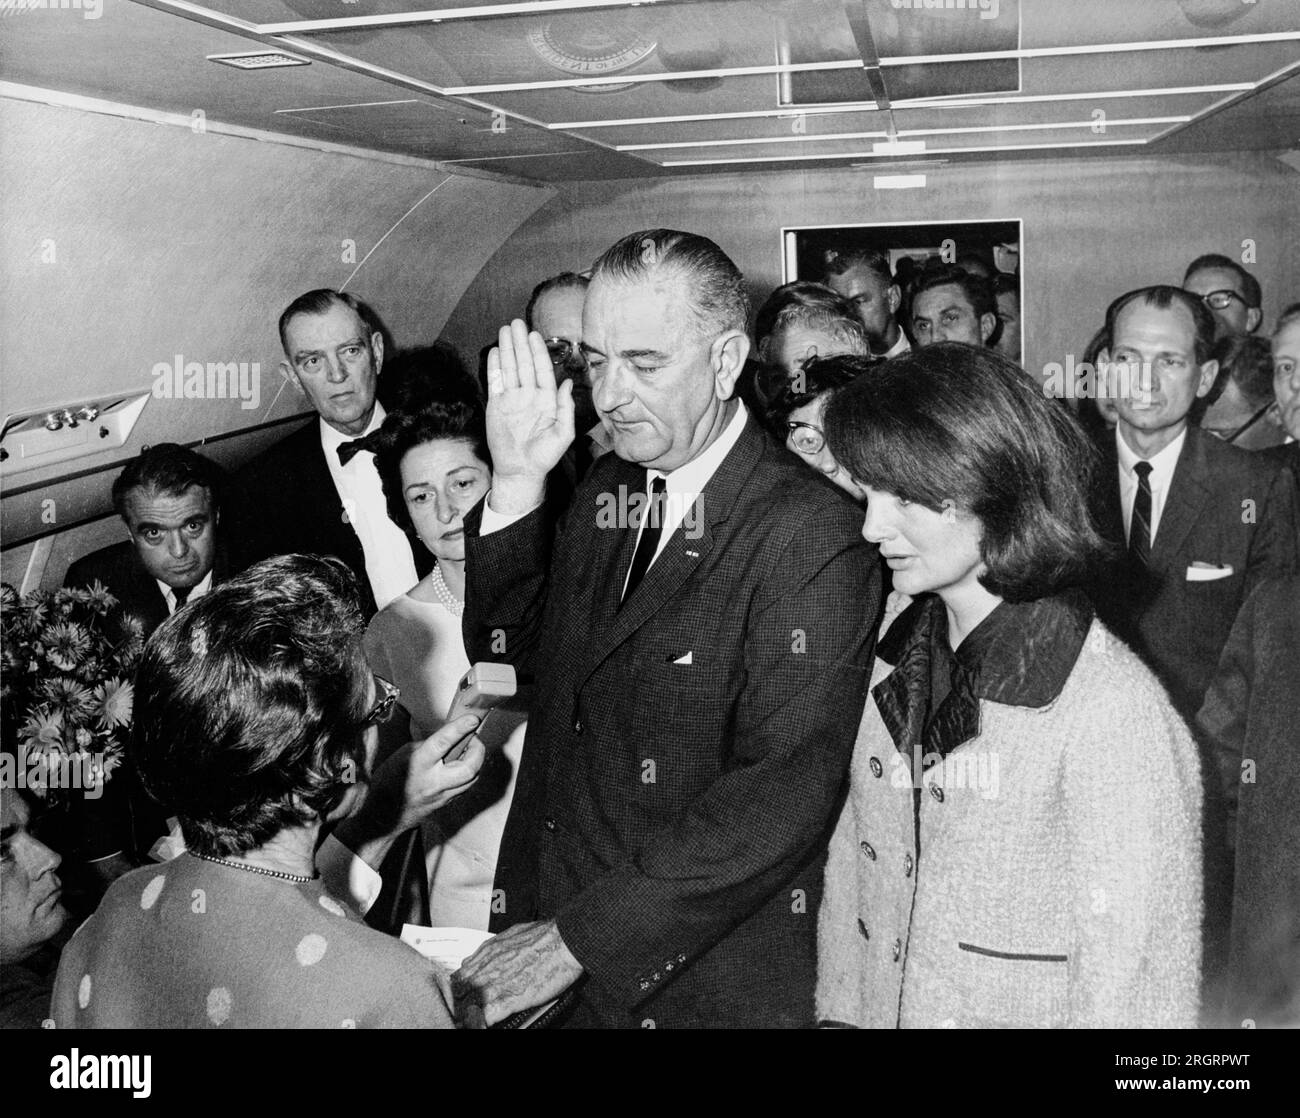 Dallas, Texas: November 22, 1963 Lyndon B. Johnson taking the oath of office on Air Force One at Love Field Airport two hours and eight minutes after the assassination of John F. Kennedy. L-R: Mac Kilduff (holding dictating machine), Judge Sarah T. Hughes, Jack Valenti, Congressman Albert Thomas, Marie Fehmer (behind Thomas), First Lady Lady Bird Johnson, Dallas Police Chief Jesse Curry, President Lyndon B. Johnson, Evelyn Lincoln (eyeglasses only visible above LBJ's shoulder), Congressman Homer Thornberry (in shadow, partially obscured by LBJ), Roy Kellerman (partially obscured by Thornberry) Stock Photo